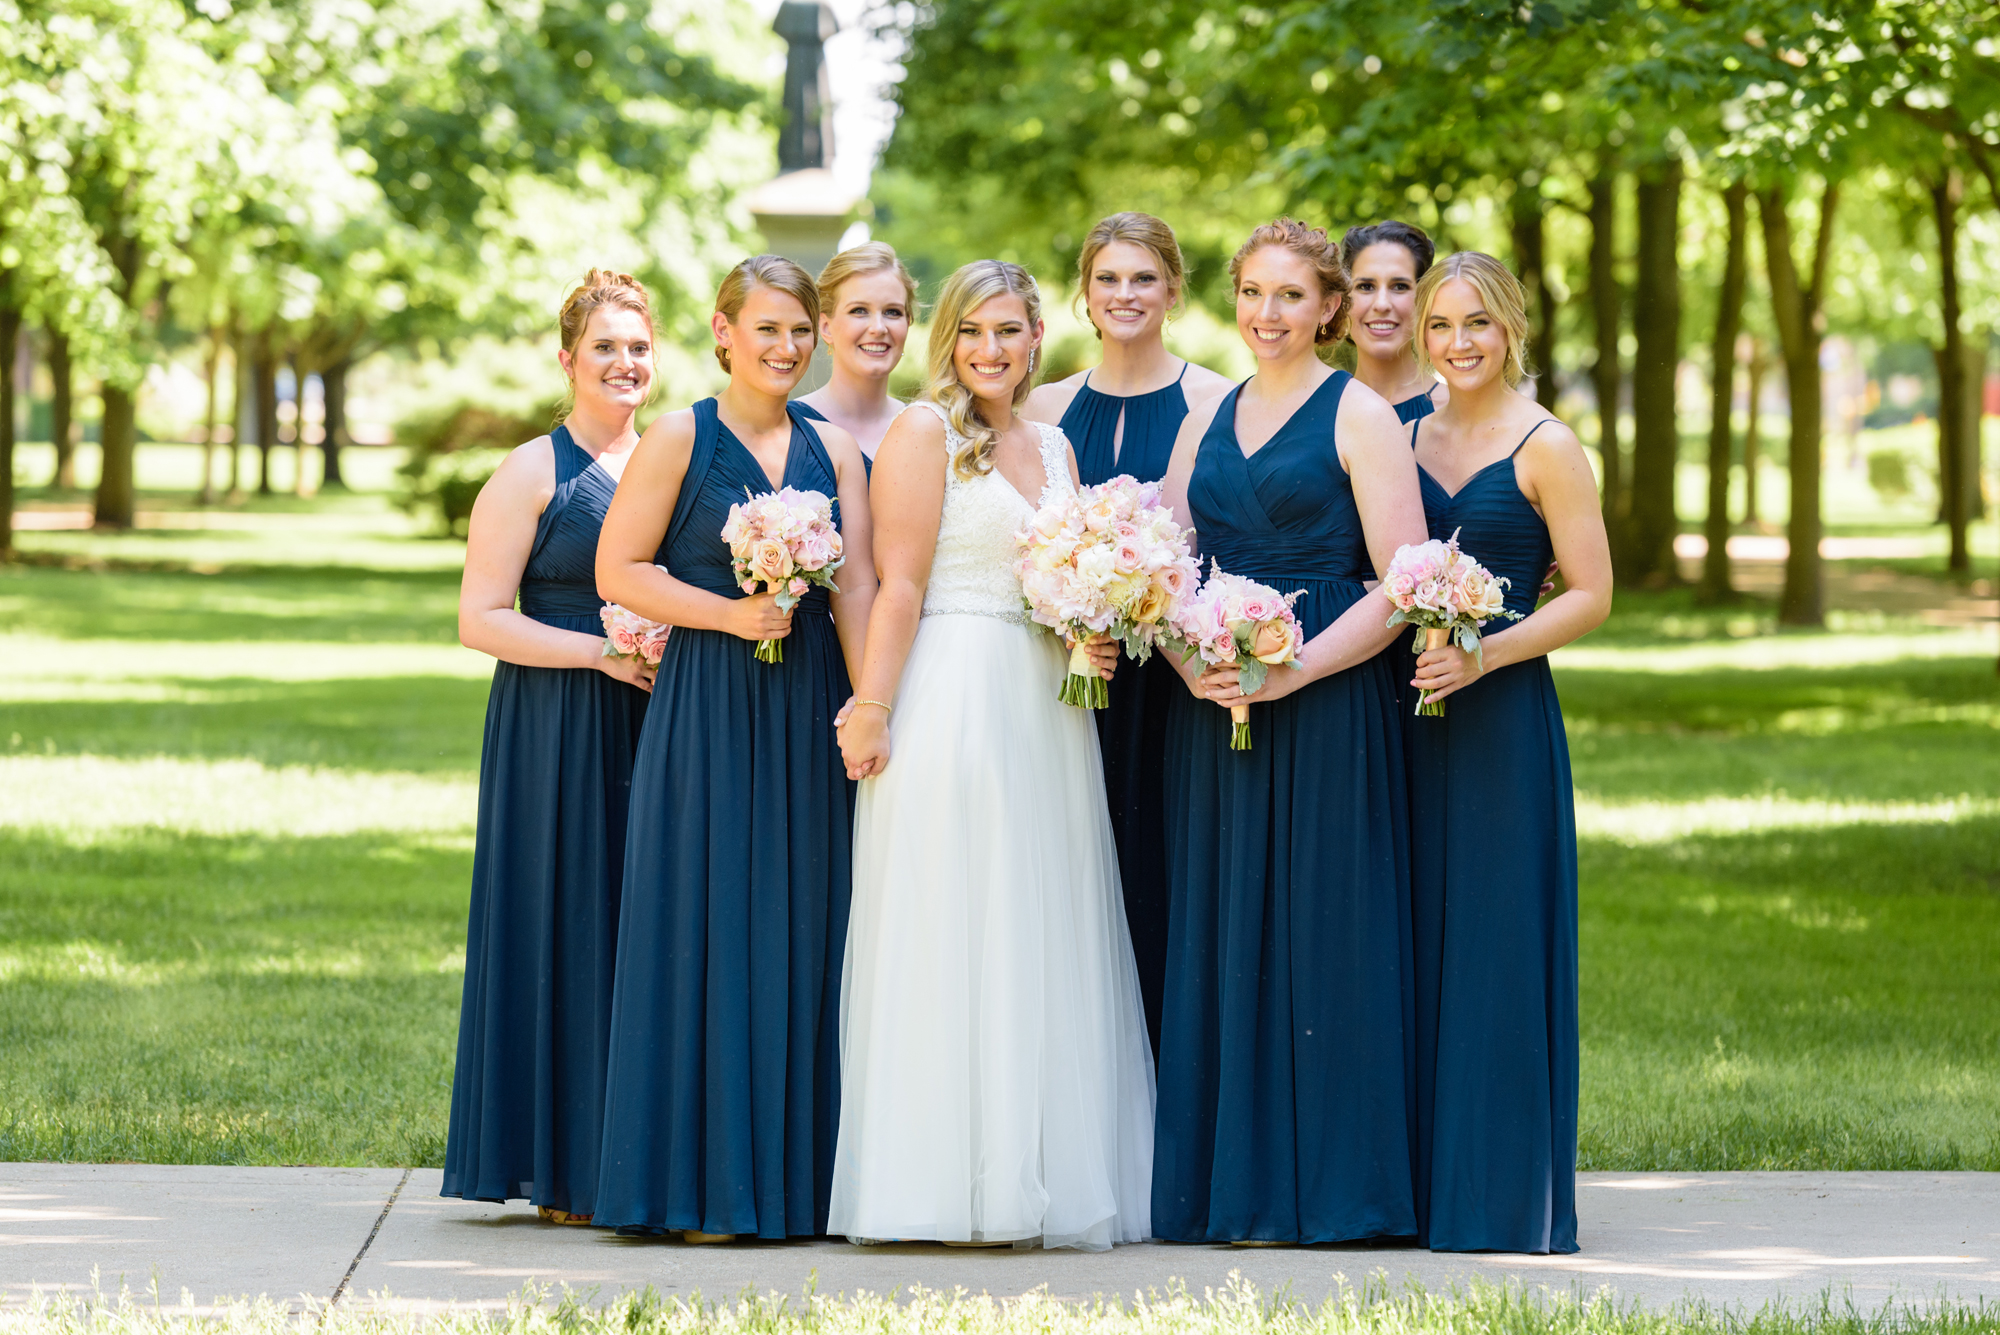 Bridesmaids on God Quad after a wedding ceremony at the Basilica of the Sacred Heart on the campus of Notre Dame